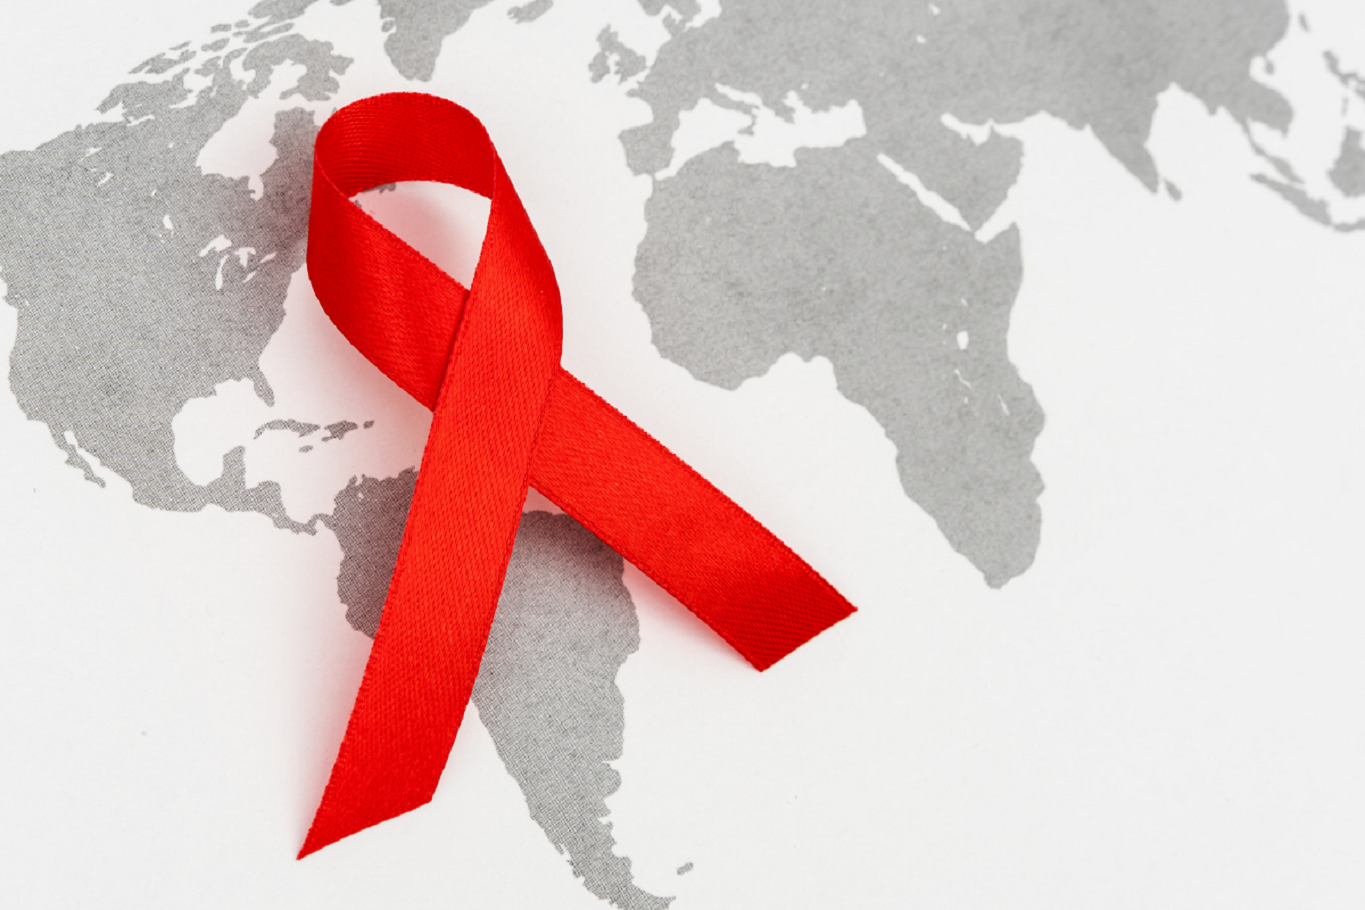 Is there something more sinister than money behind the new HIV scare?